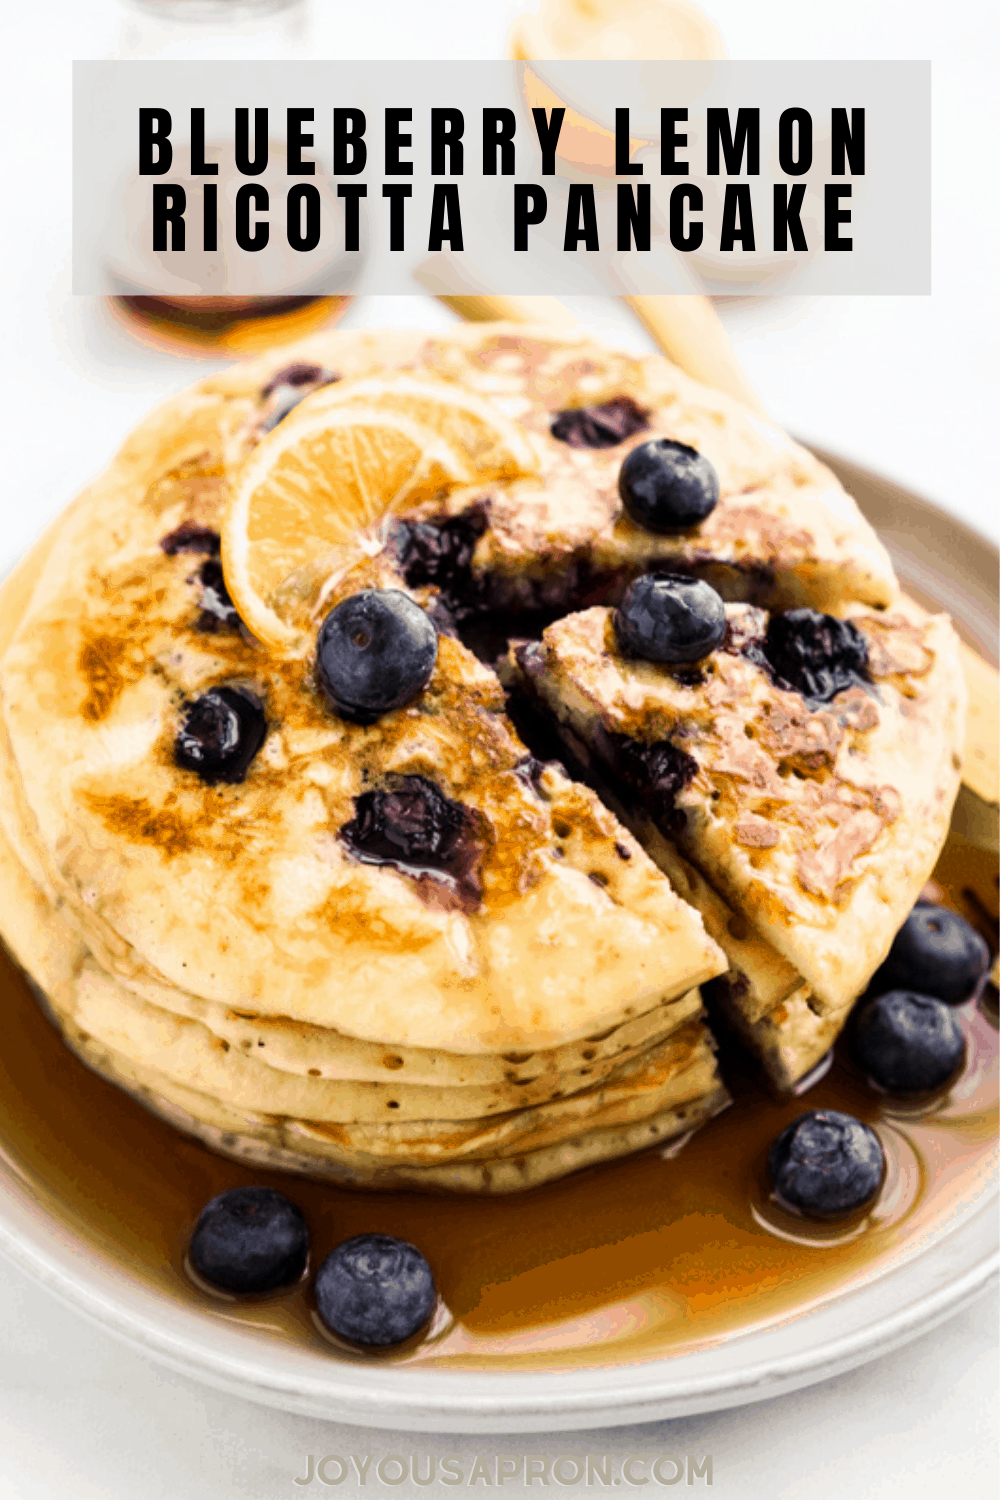 Blueberry Lemon Ricotta Pancake - easy, light and fluffy lemon ricotta pancake filled with fresh blueberries makes for a delicious brunch and breakfast! Serve with maple syrup. via @joyousapron